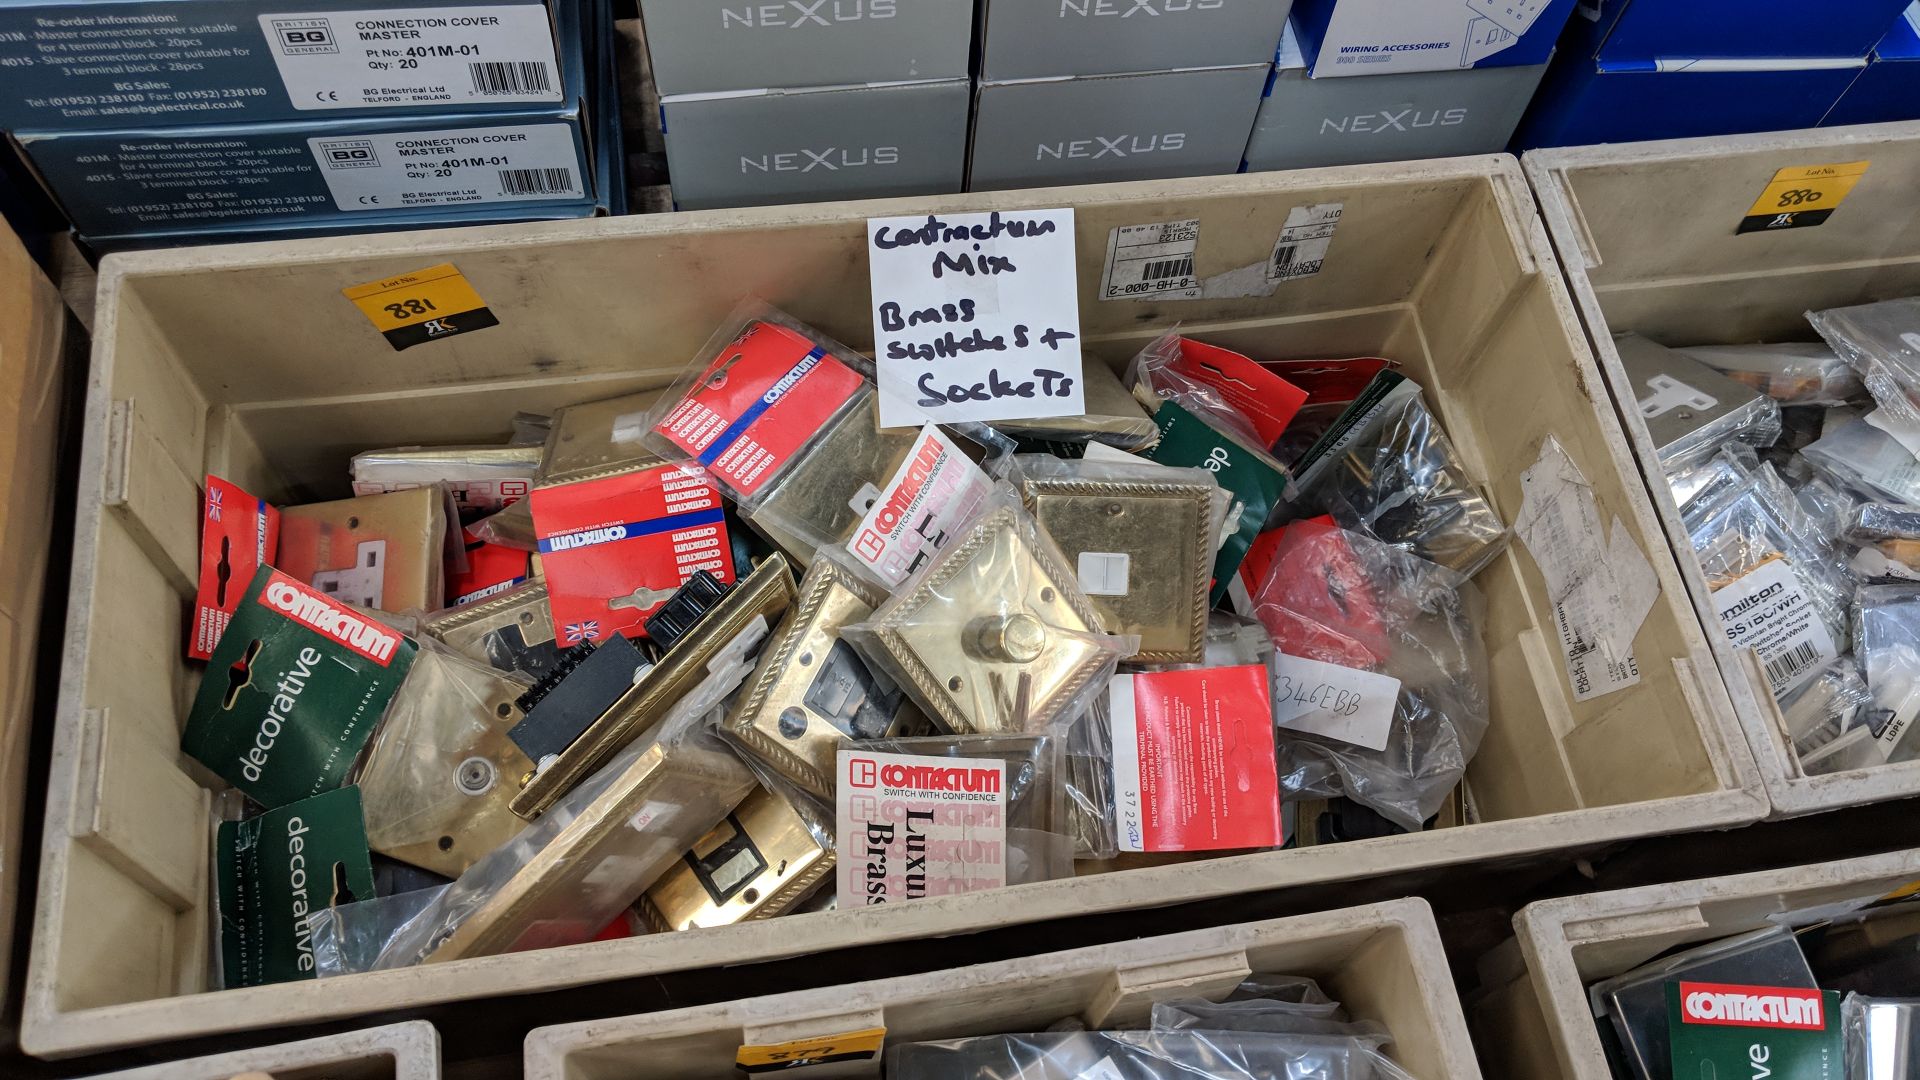 Contents of a crate of assorted Contactum brass switches and sockets - crate excluded The vast